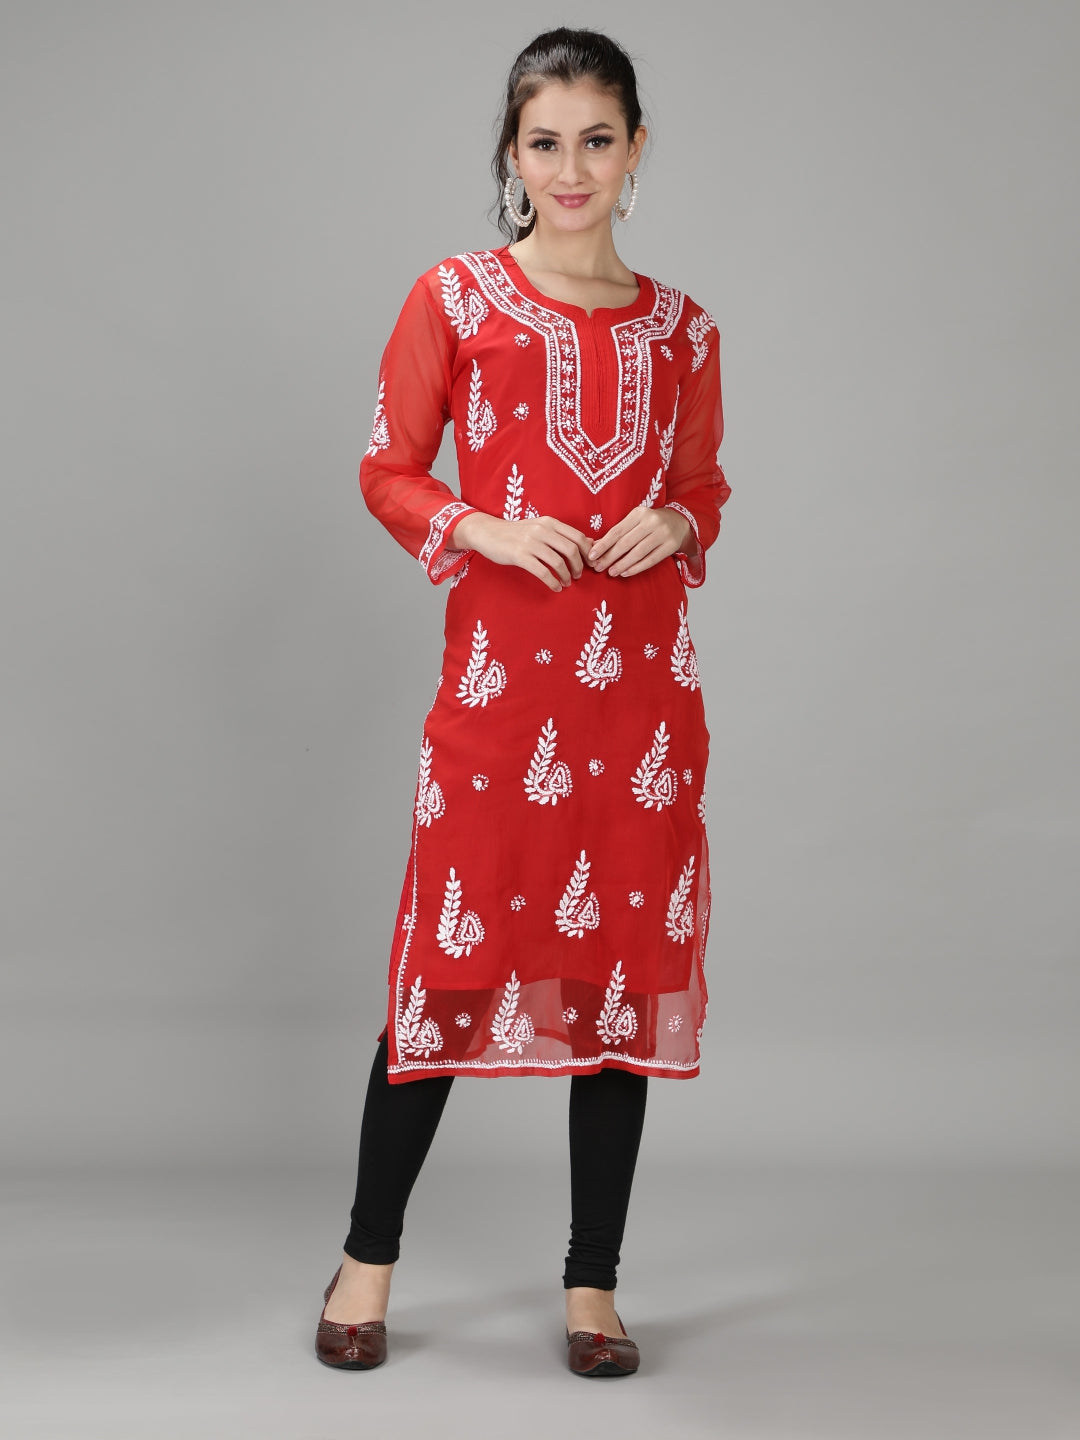 Embroidered-Red-Lucknowi-Chikan-Kurti